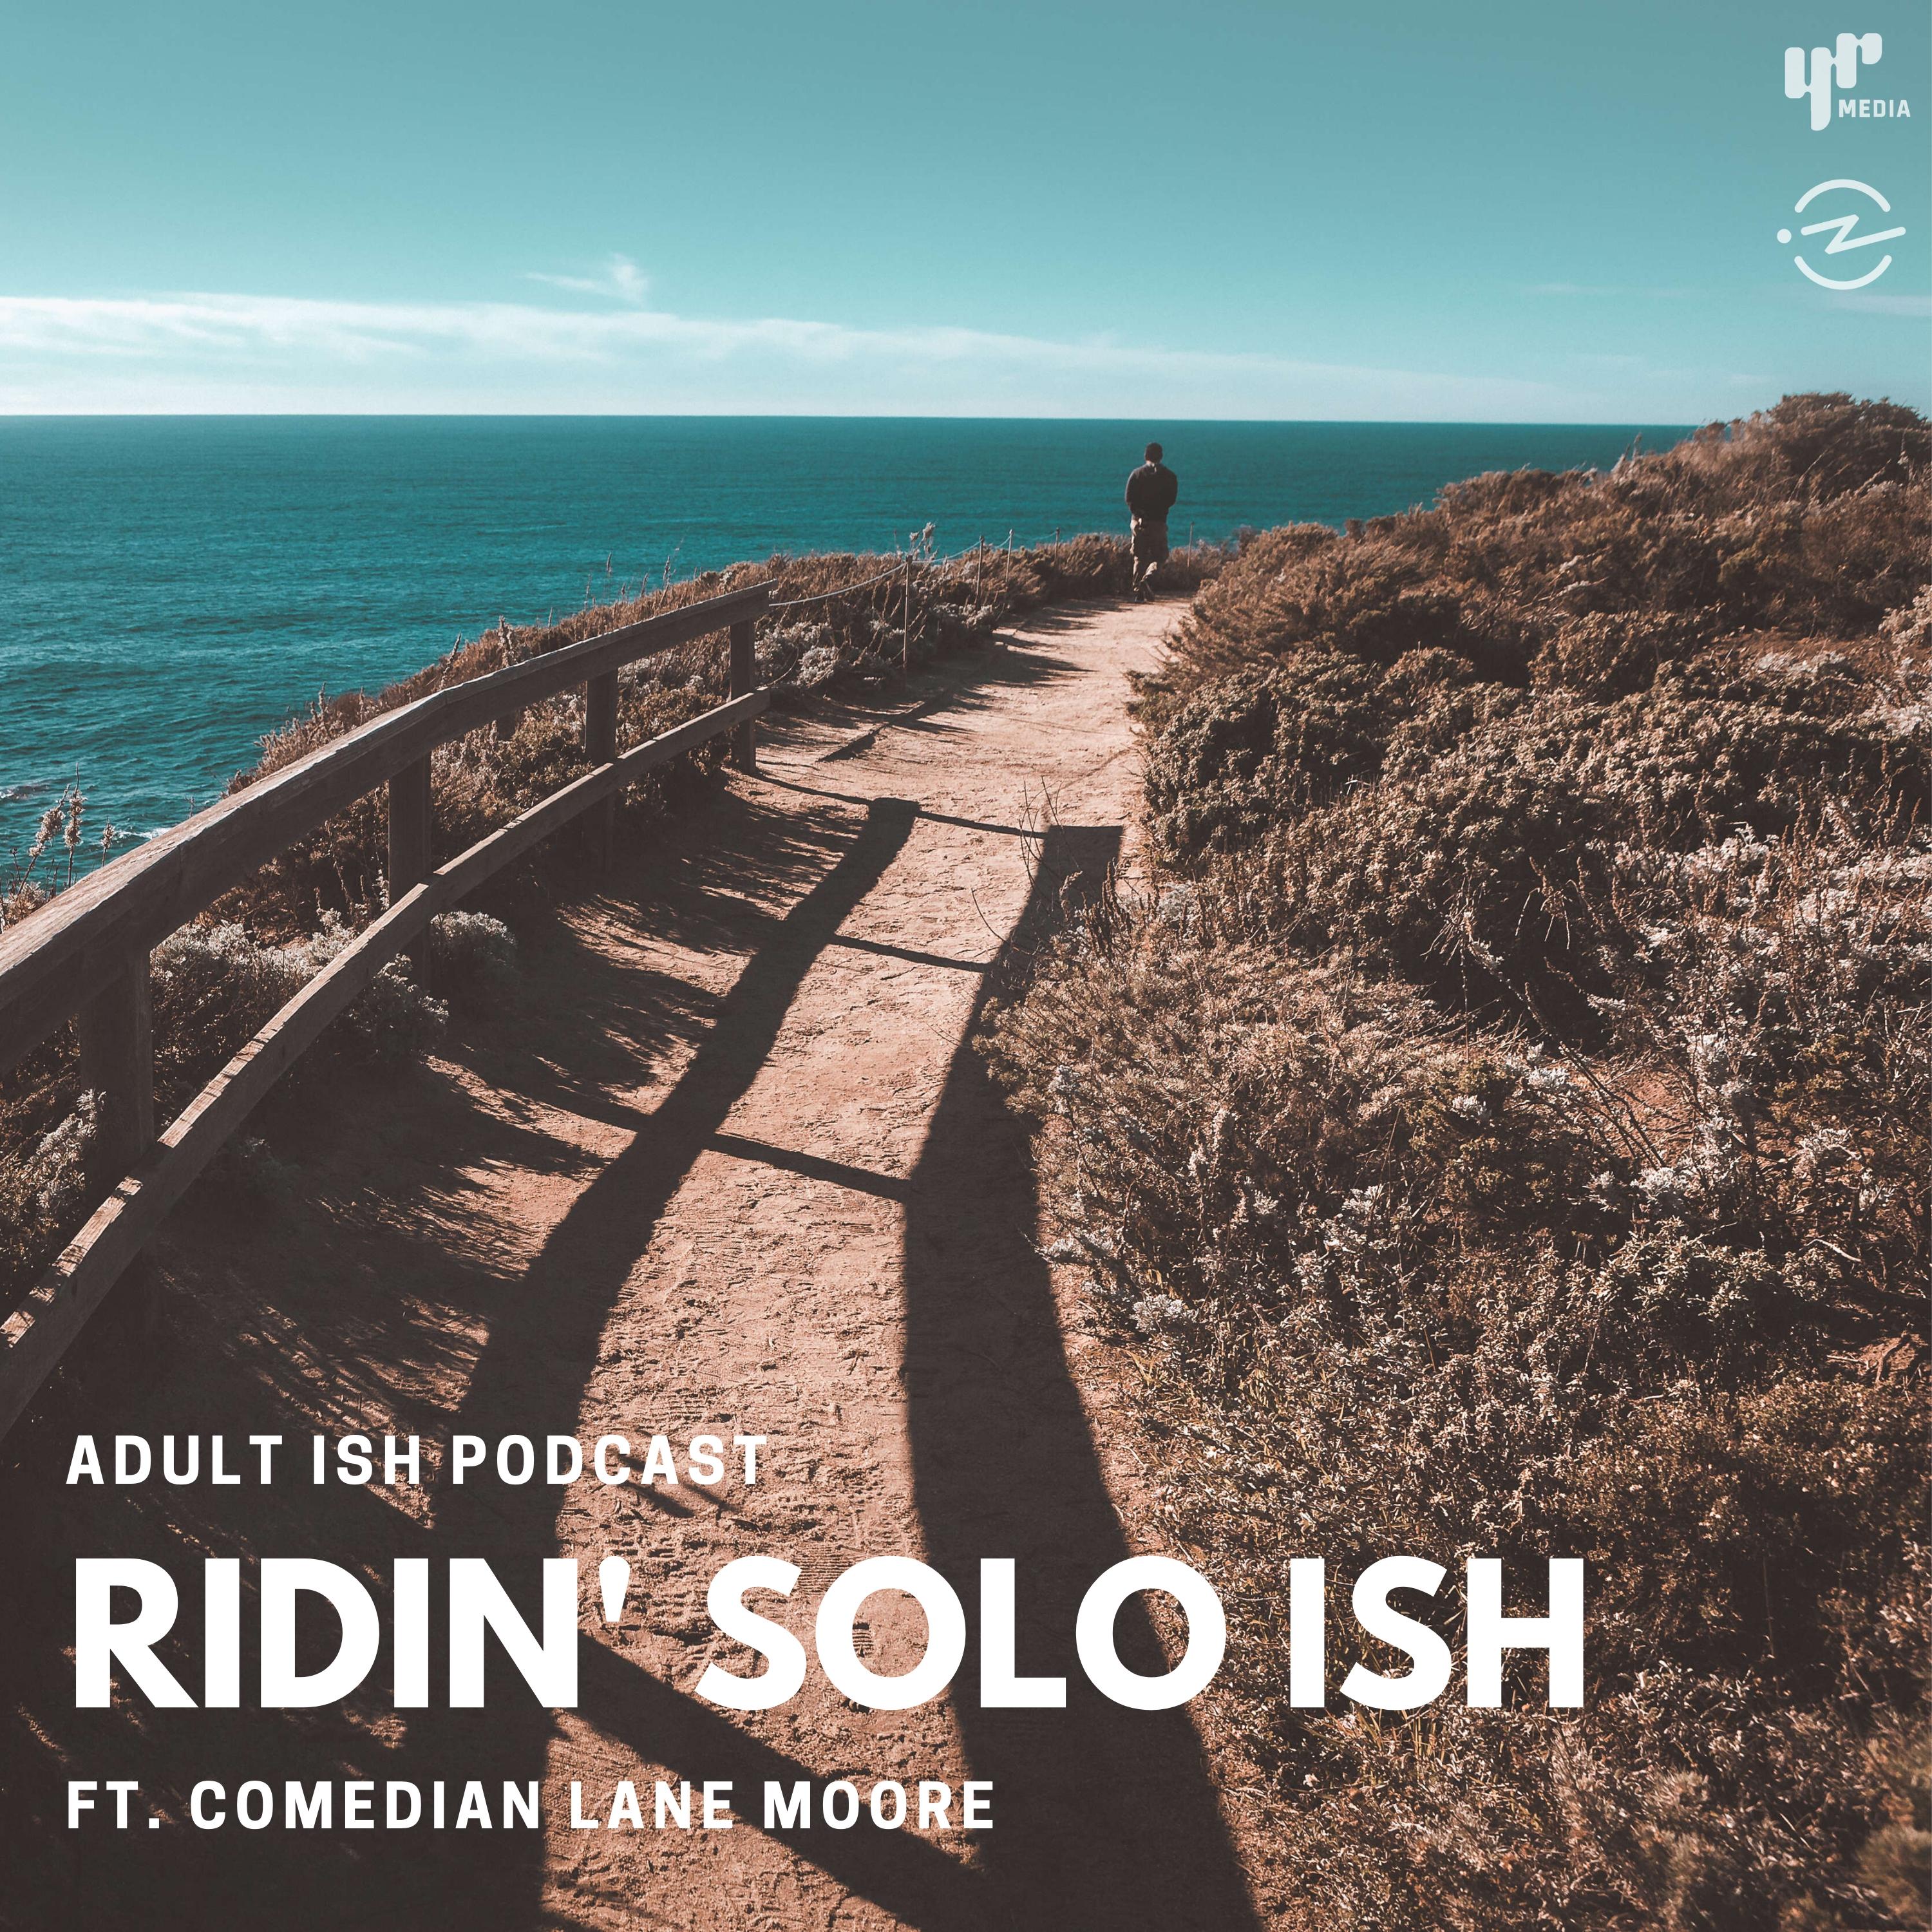 Thumbnail for "Ridin' Solo ISH (ft. Comedian Lane Moore)".